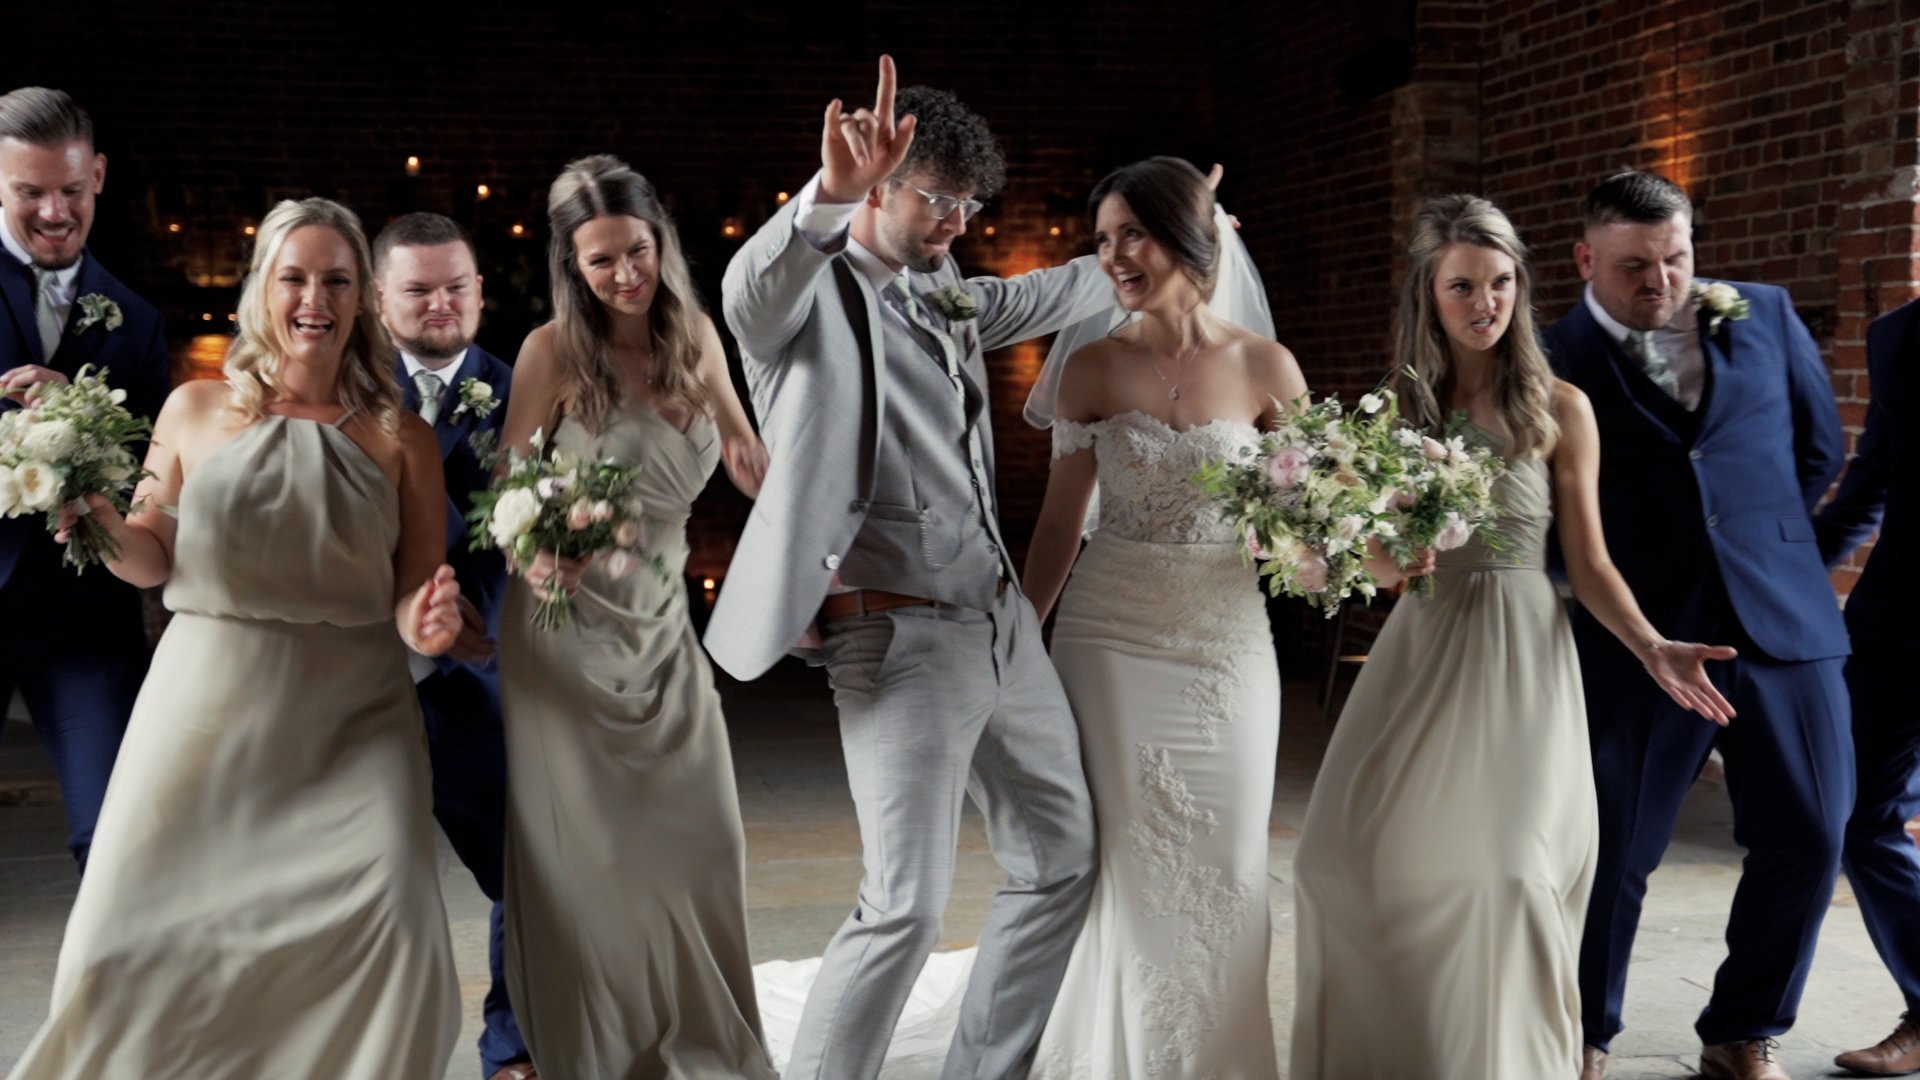 Bride and groom dancing on their wedding day with three bridesmaids and two groomsmen all dressed in formal wedding party attire